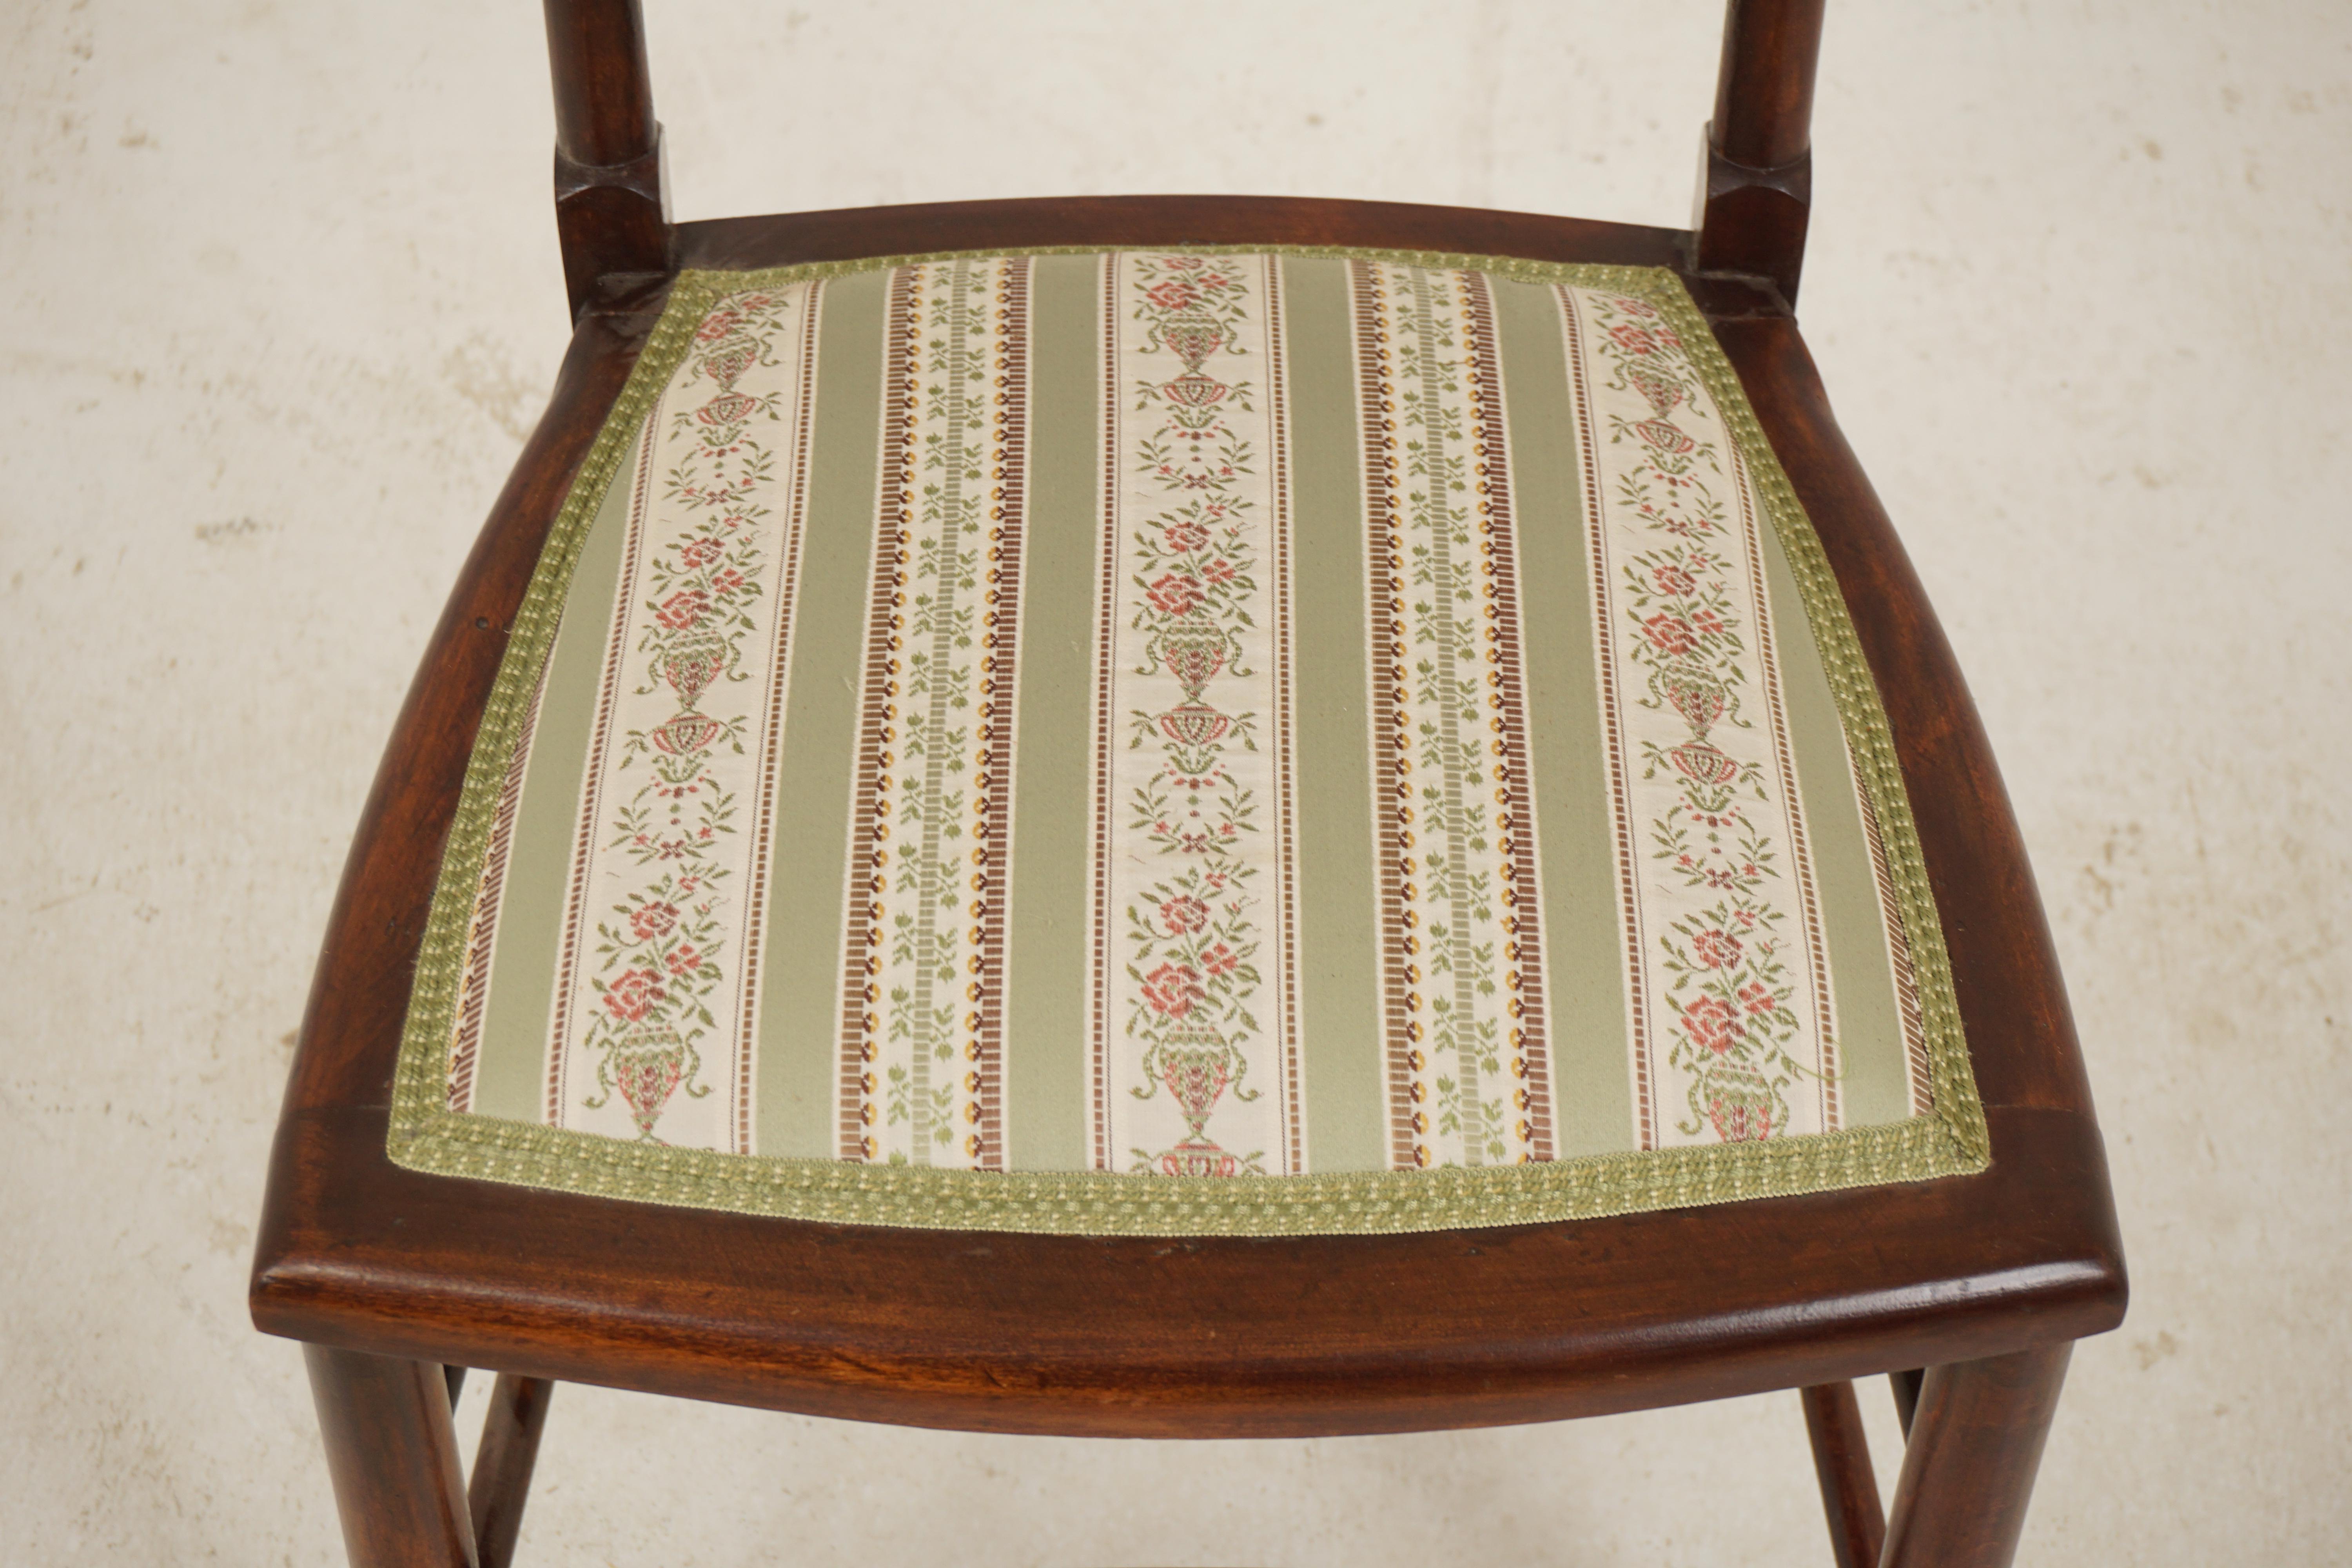 American Art Nouveau Walnut Inlaid Bedroom Chair, Scotland 1910, H903 For Sale